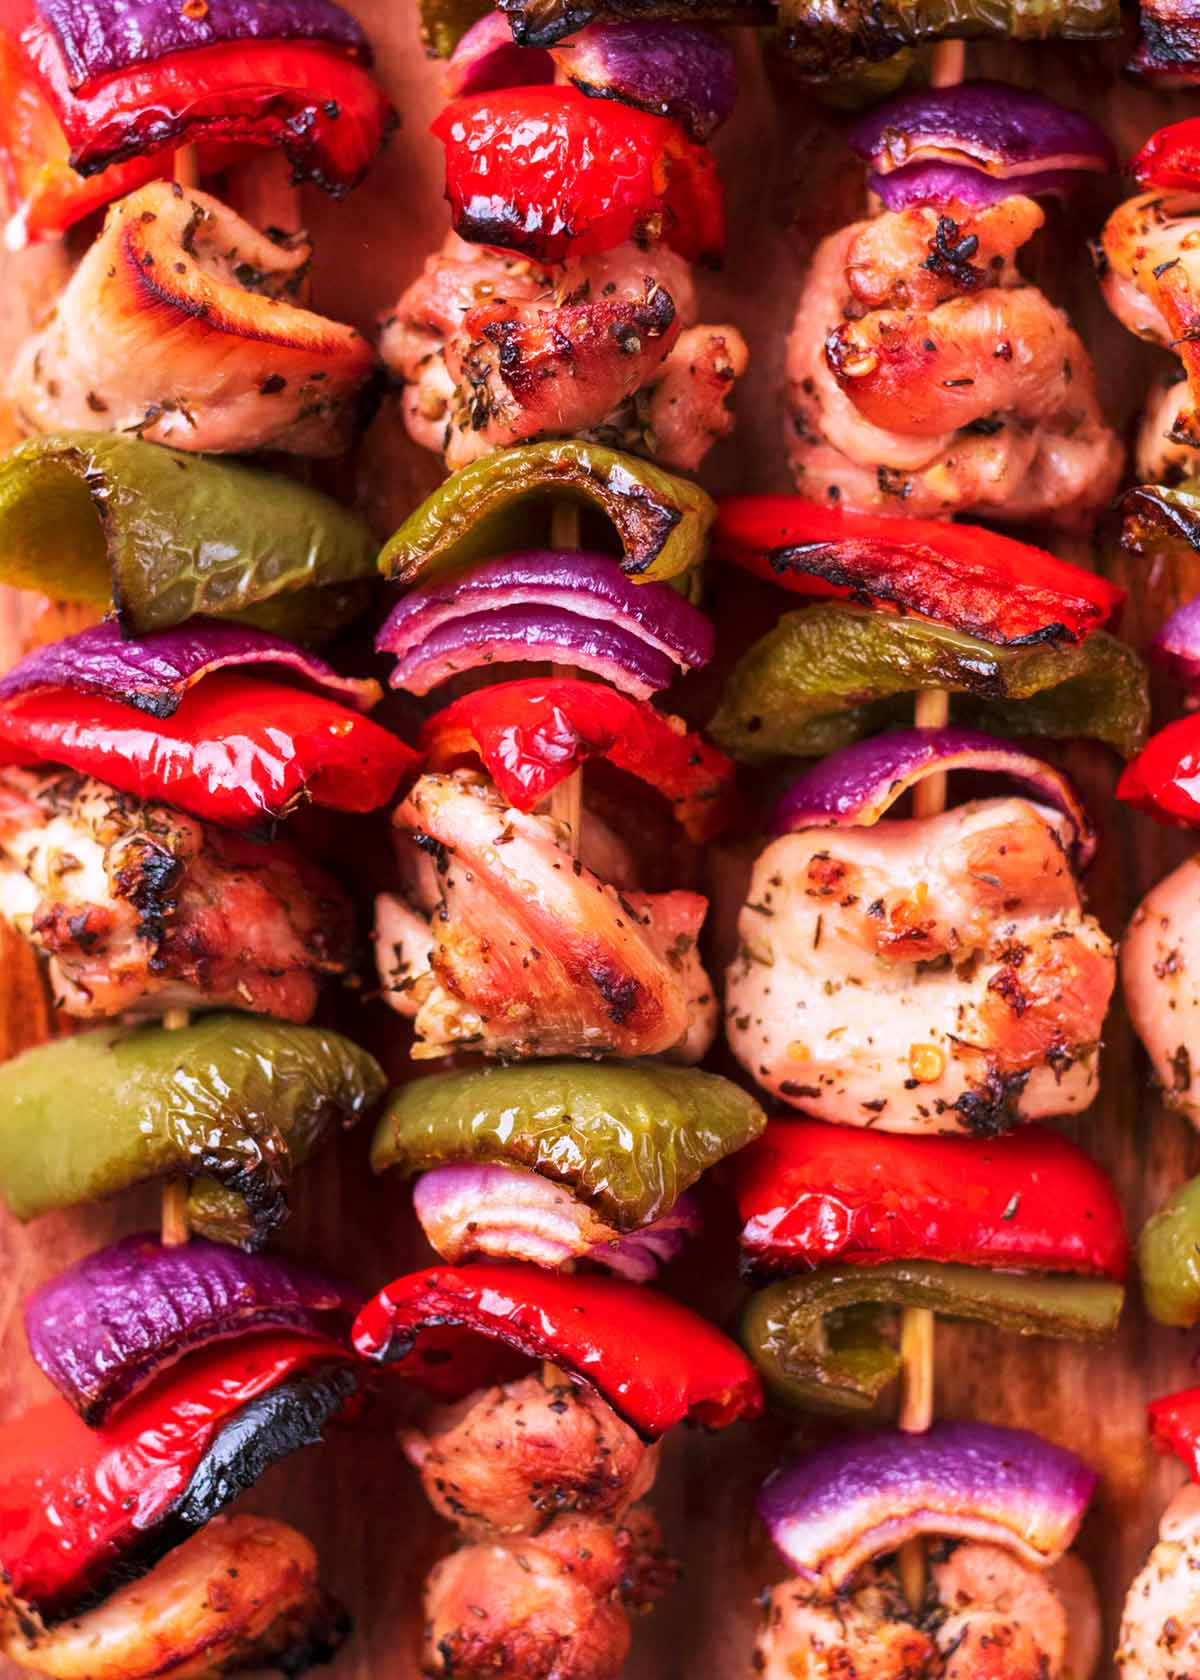 Cooked chicken and vegetable skewers.